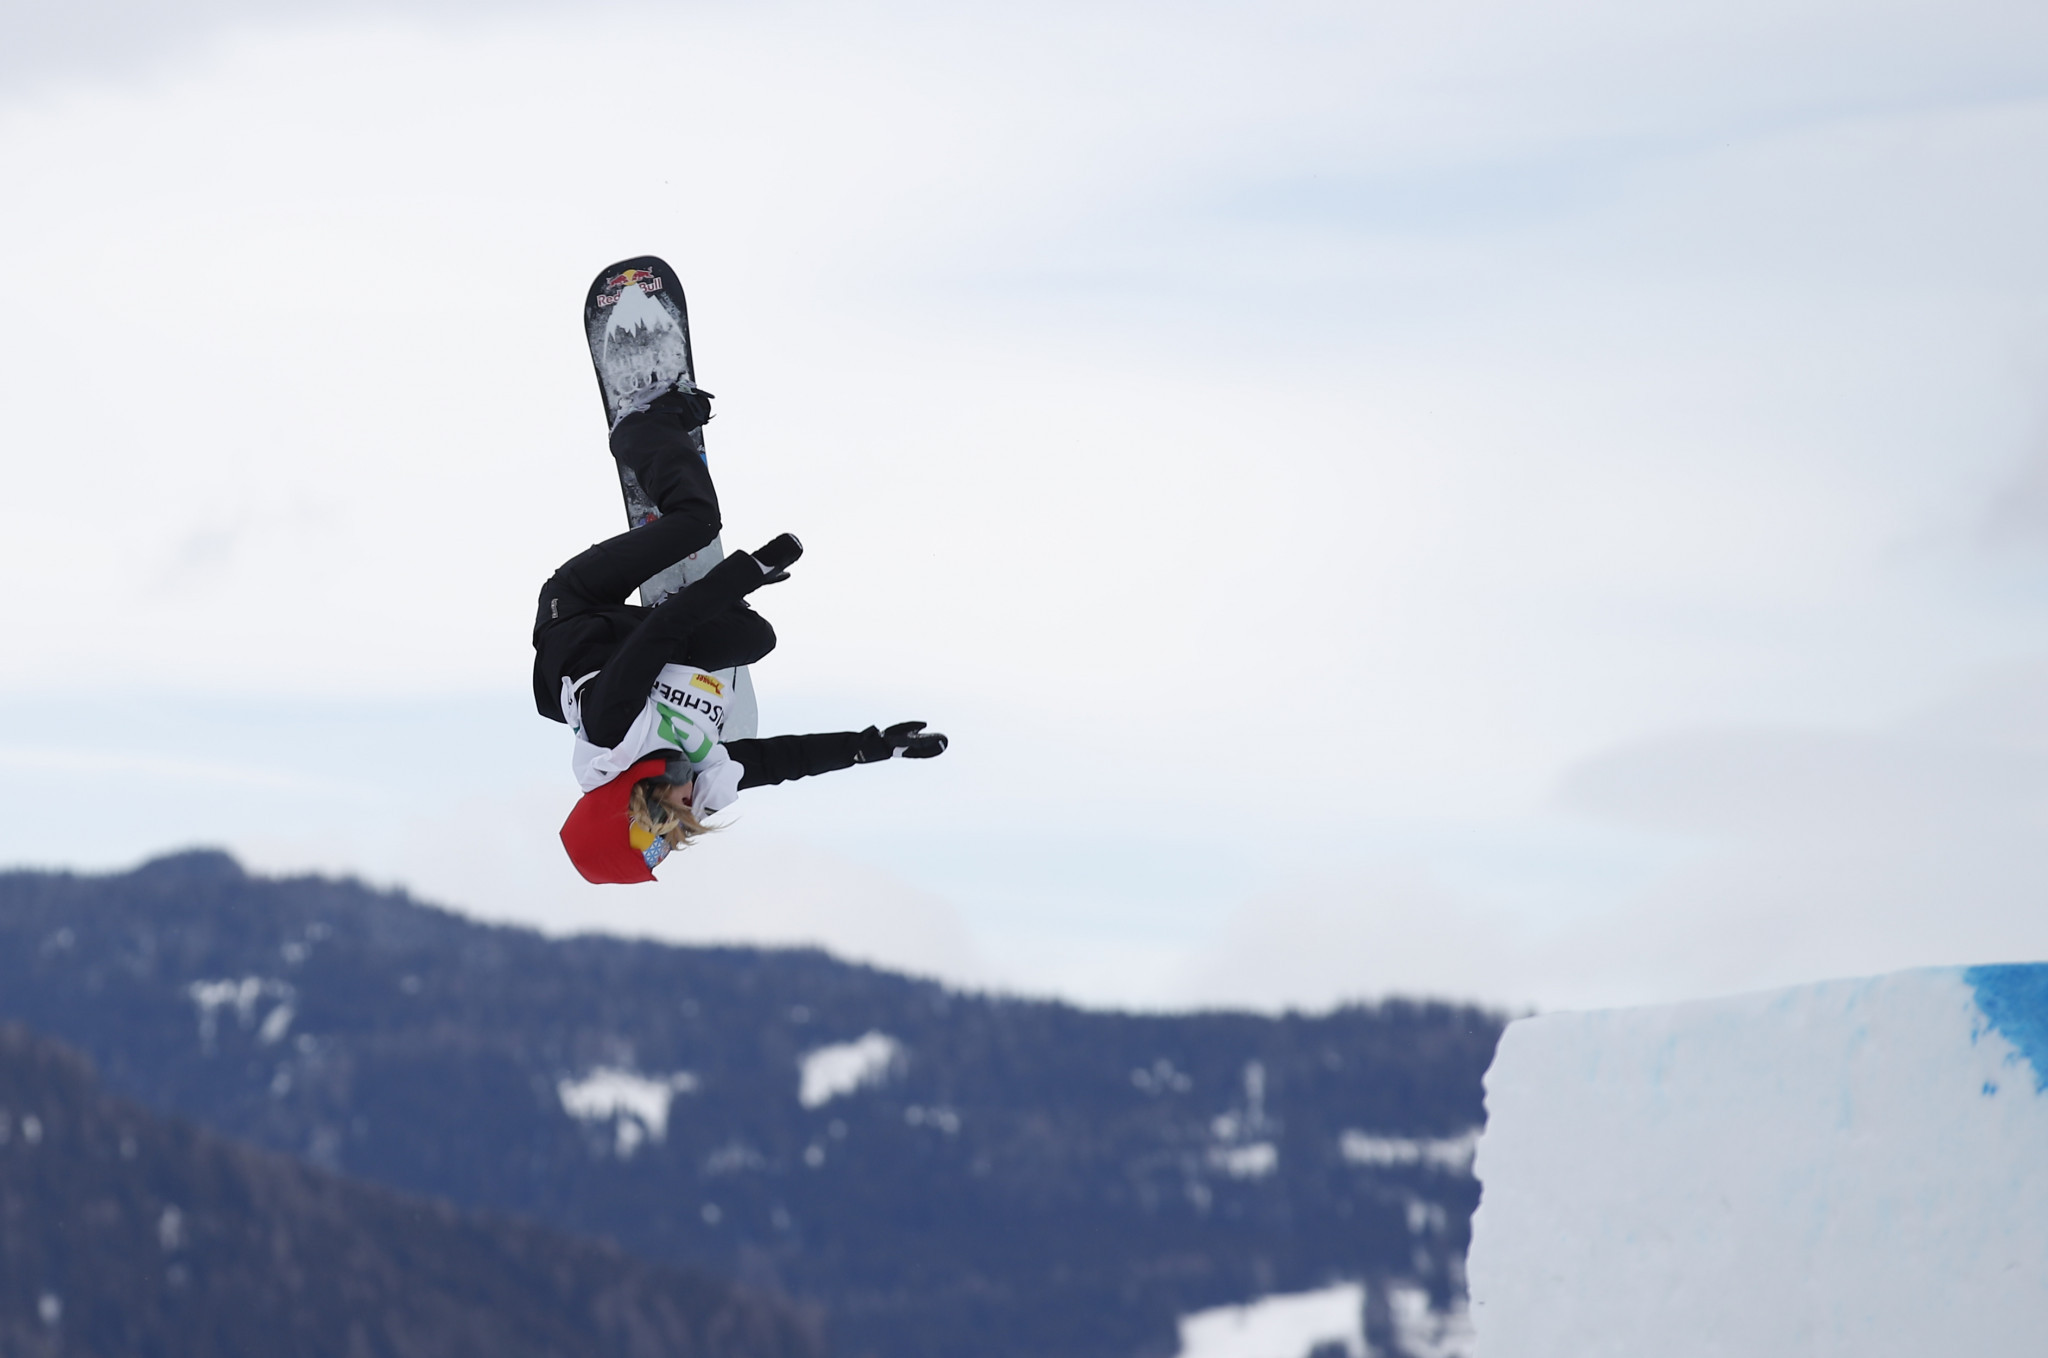 Anna Gasser of Austria is the favourite in the women's FIS Snowboard Big Air World Cup event in Modena ©Getty Images